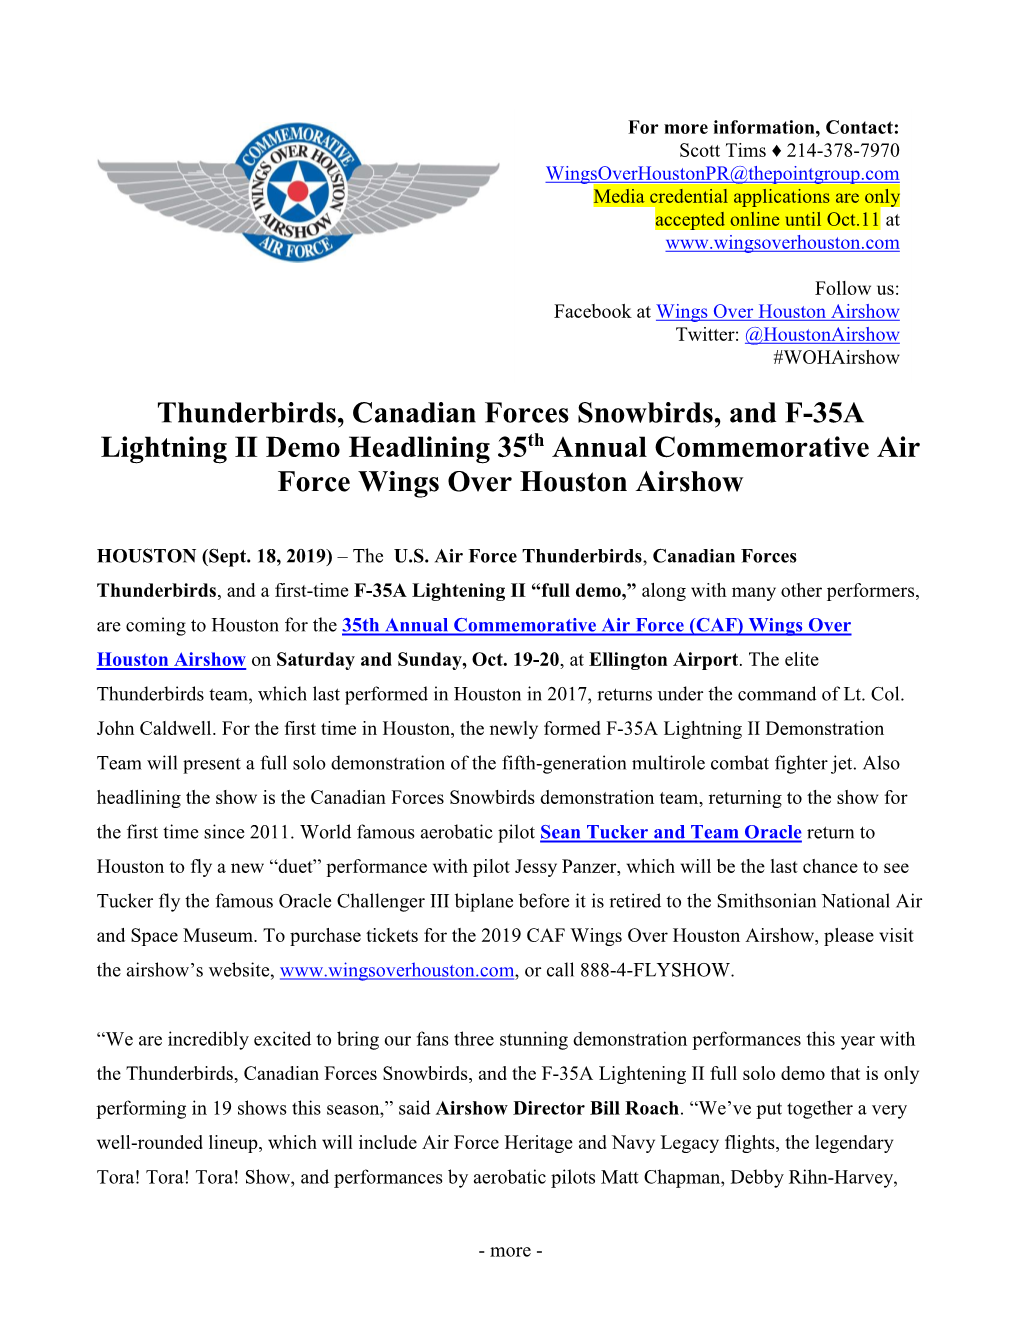 Thunderbirds, Canadian Forces Snowbirds, and F-35A Lightning II Demo Headlining 35Th Annual Commemorative Air Force Wings Over Houston Airshow